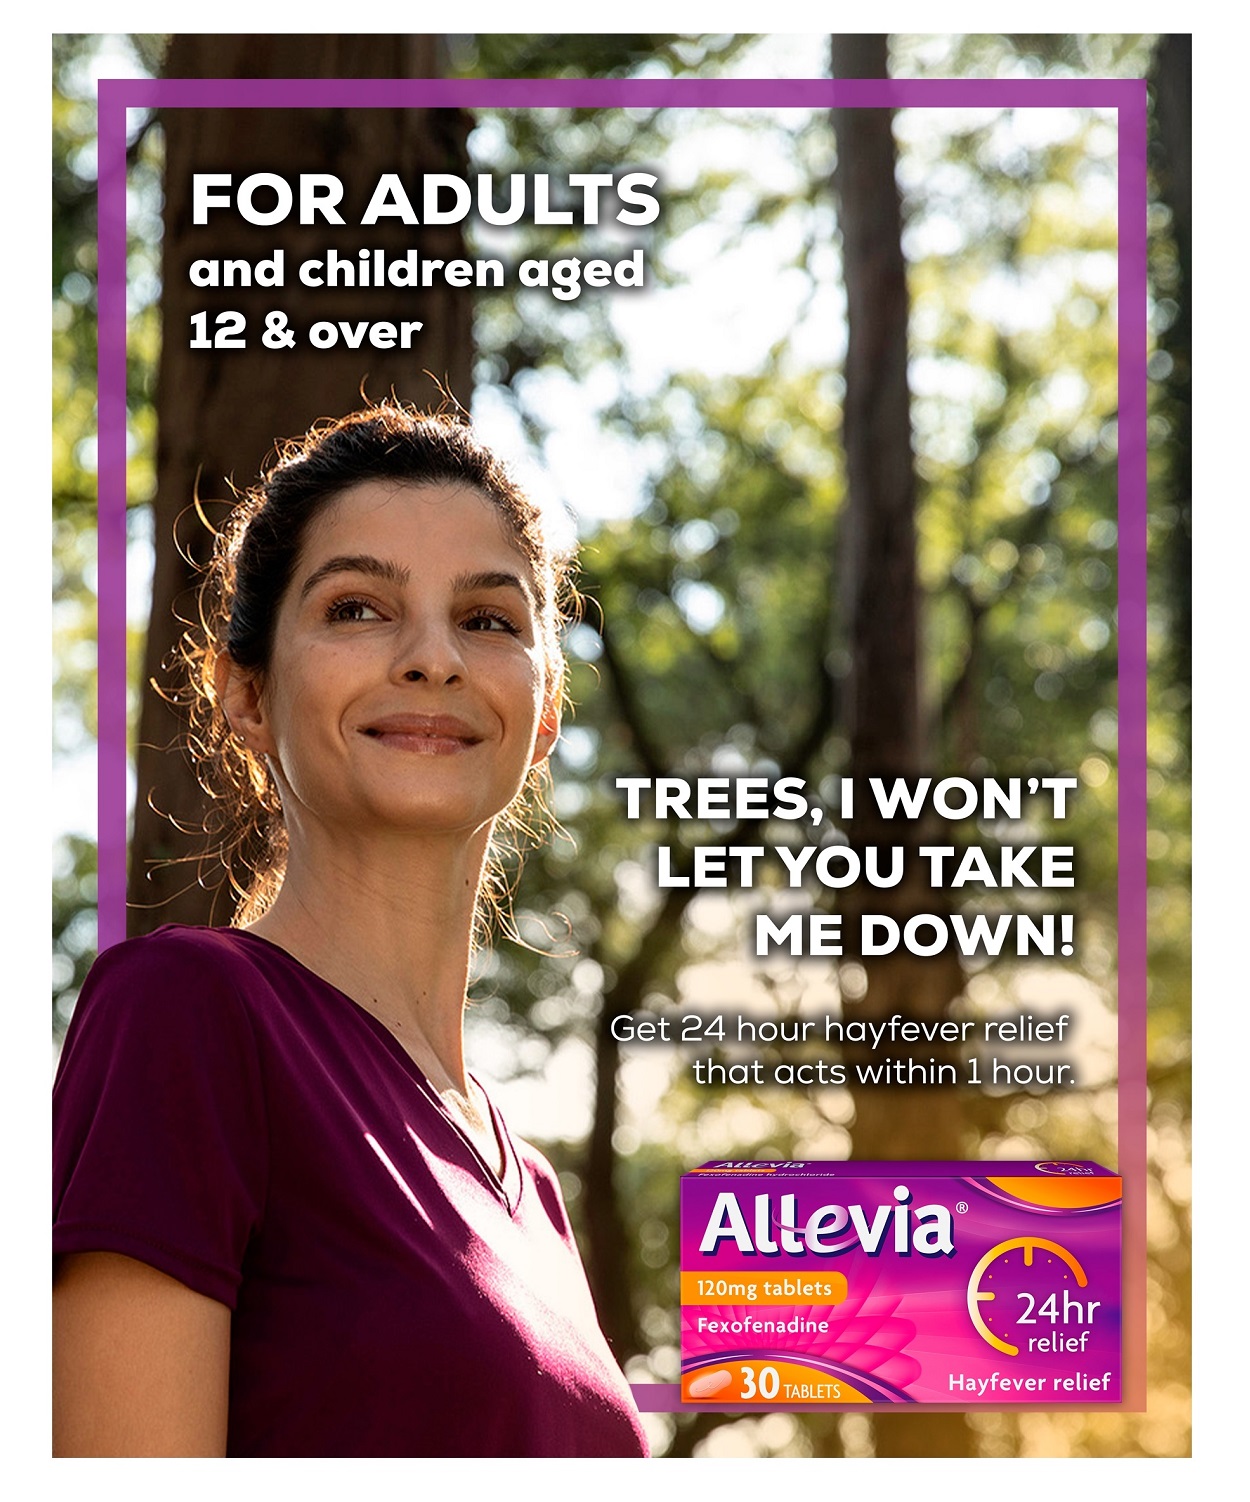 Allevia_120_mg_Tablets_Hayfever_Allergy_Relief__Banner 2 - Copy (2)